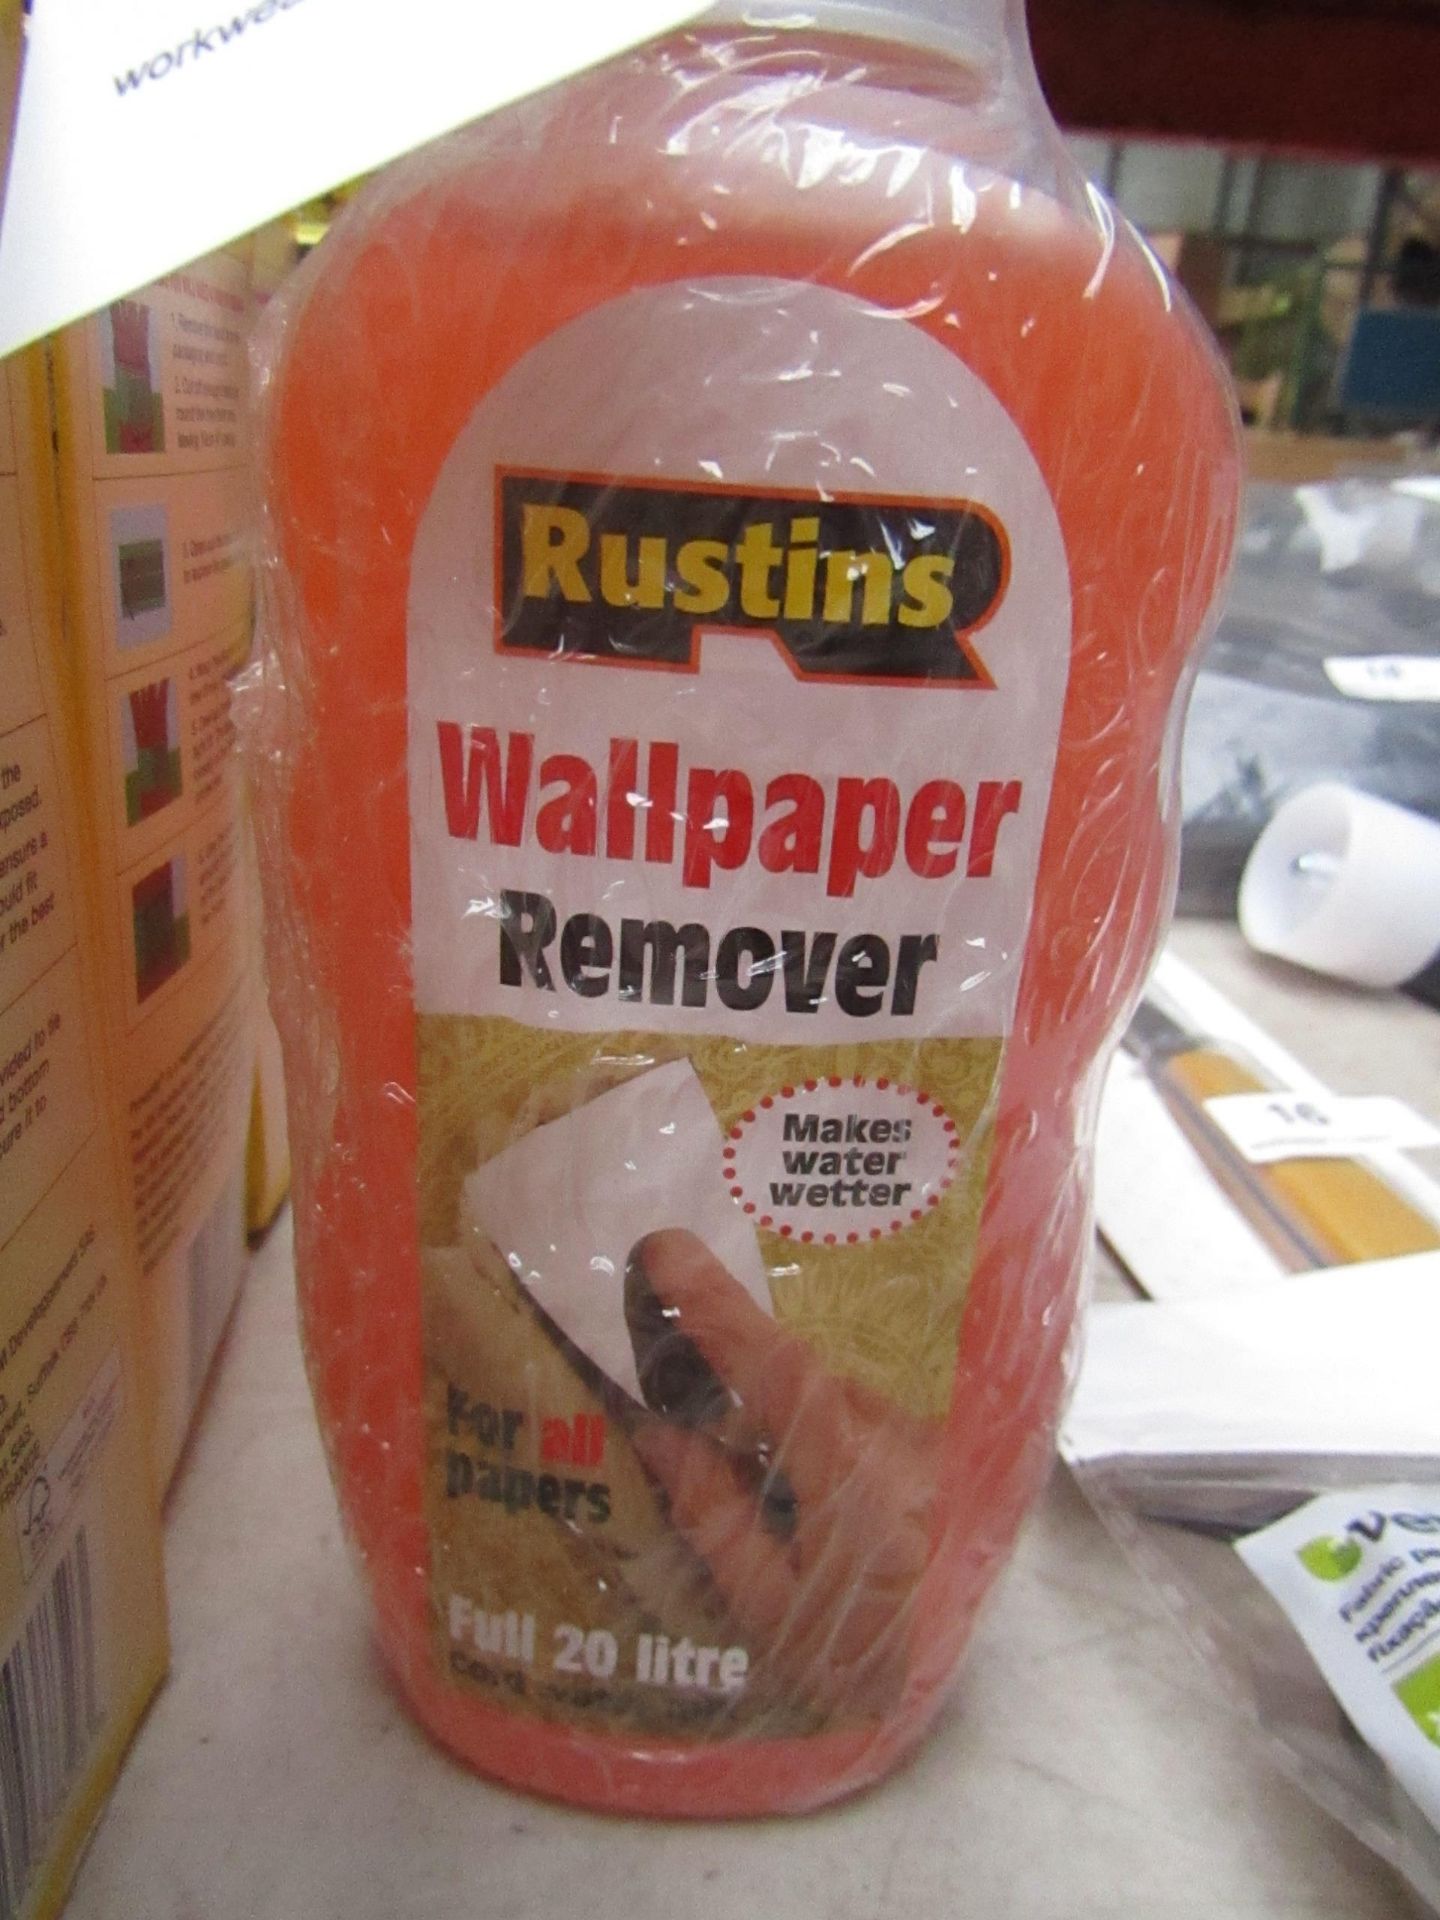 4x Rustins - Wallpaper Remover - 300ml Bottles - New & Packaged.